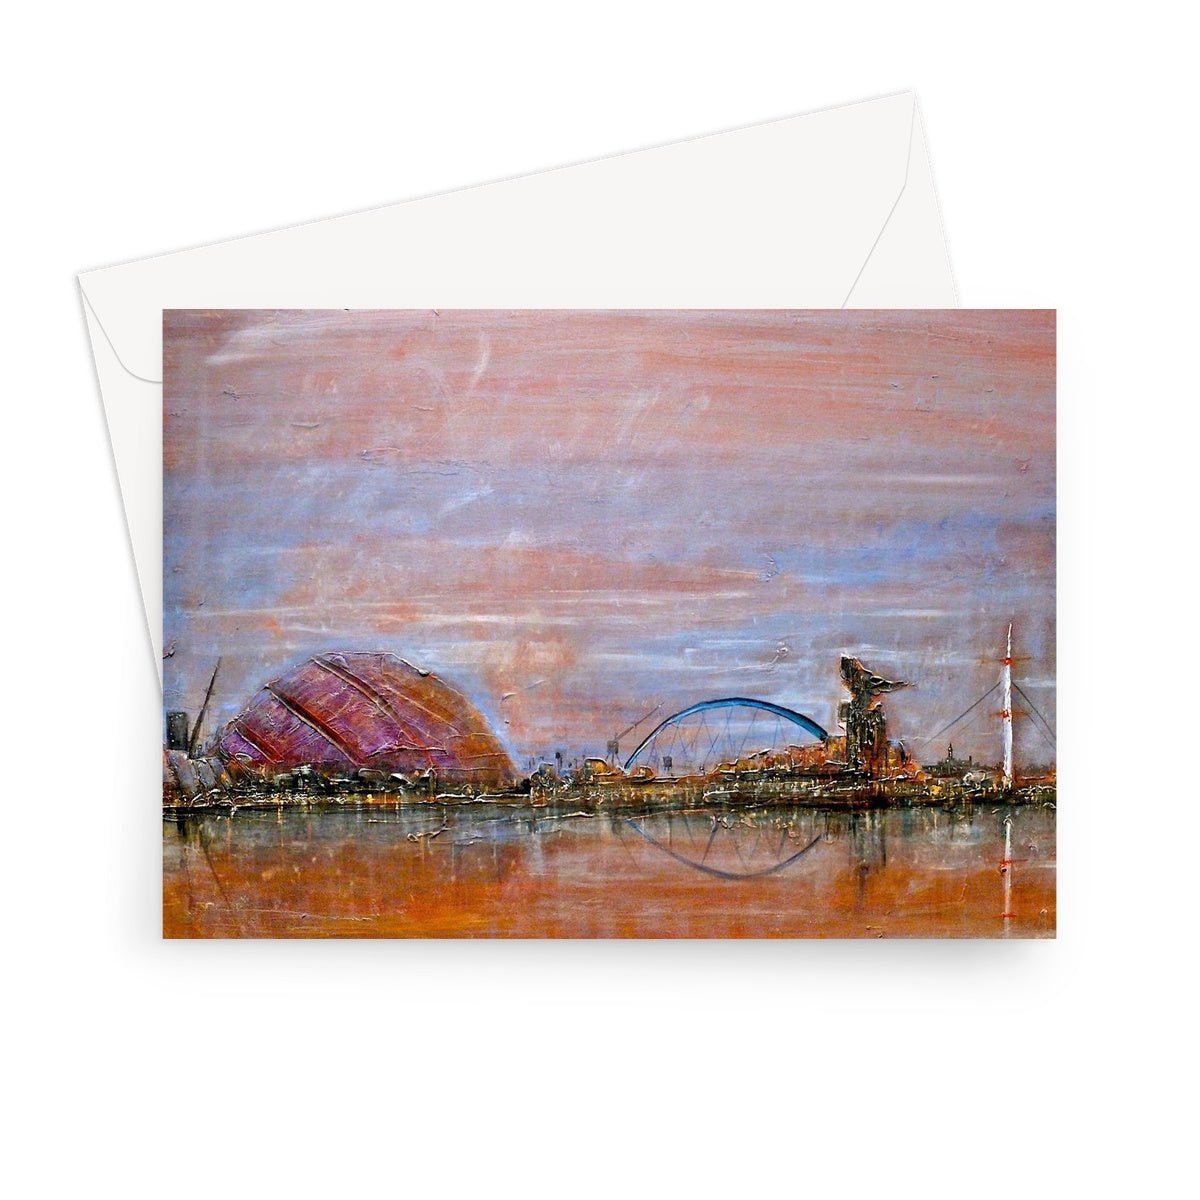 Glasgow Harbour Art Gifts Greeting Card-Greetings Cards-Edinburgh & Glasgow Art Gallery-7"x5"-10 Cards-Paintings, Prints, Homeware, Art Gifts From Scotland By Scottish Artist Kevin Hunter